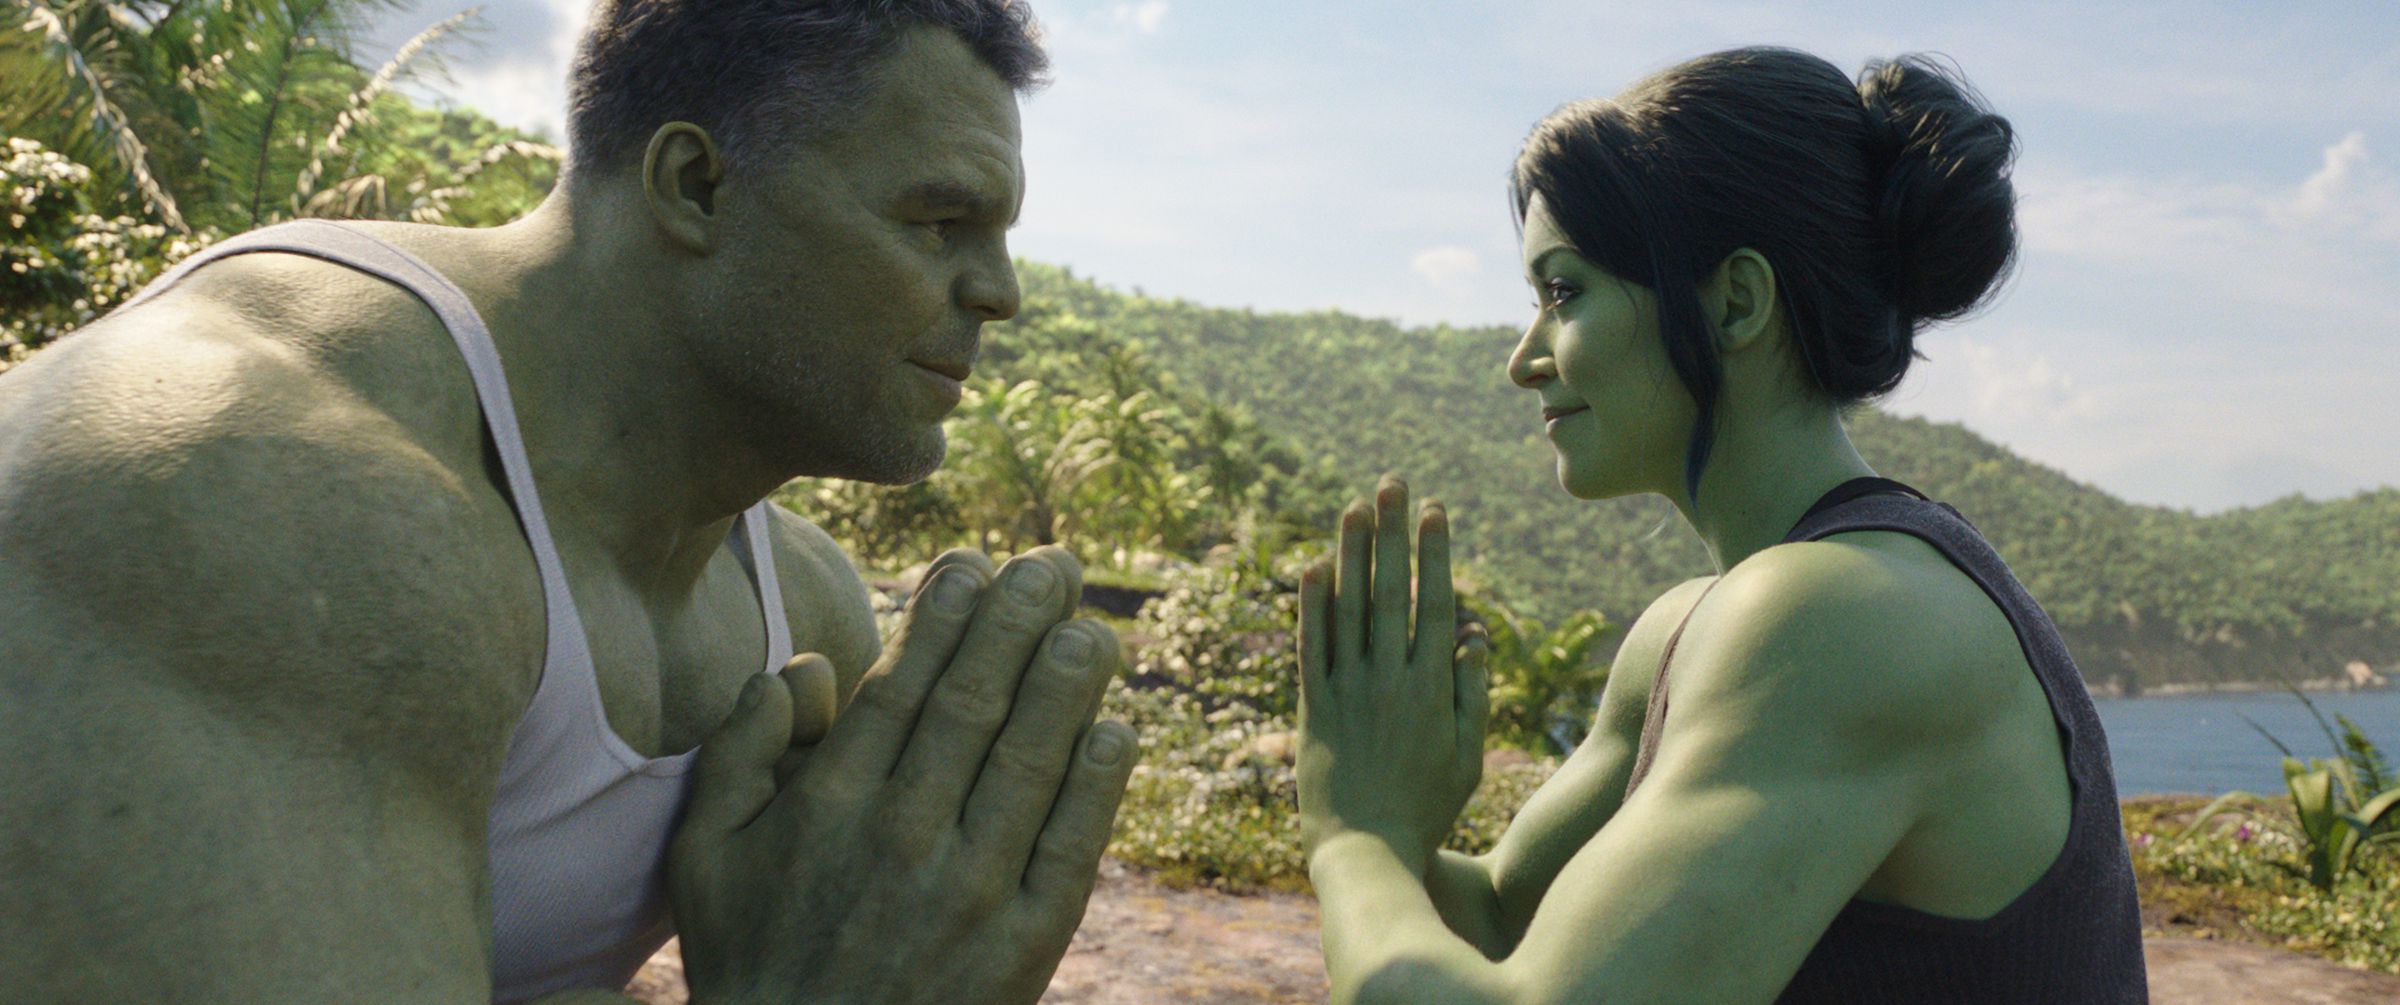 Smart Hulk wearing a white a-shirt sitting with his hands pressed together while he smiles at She-Hulk, who is sitting across from him in the same position, and wearing a black tank top. In the background, a remote island is pictured.